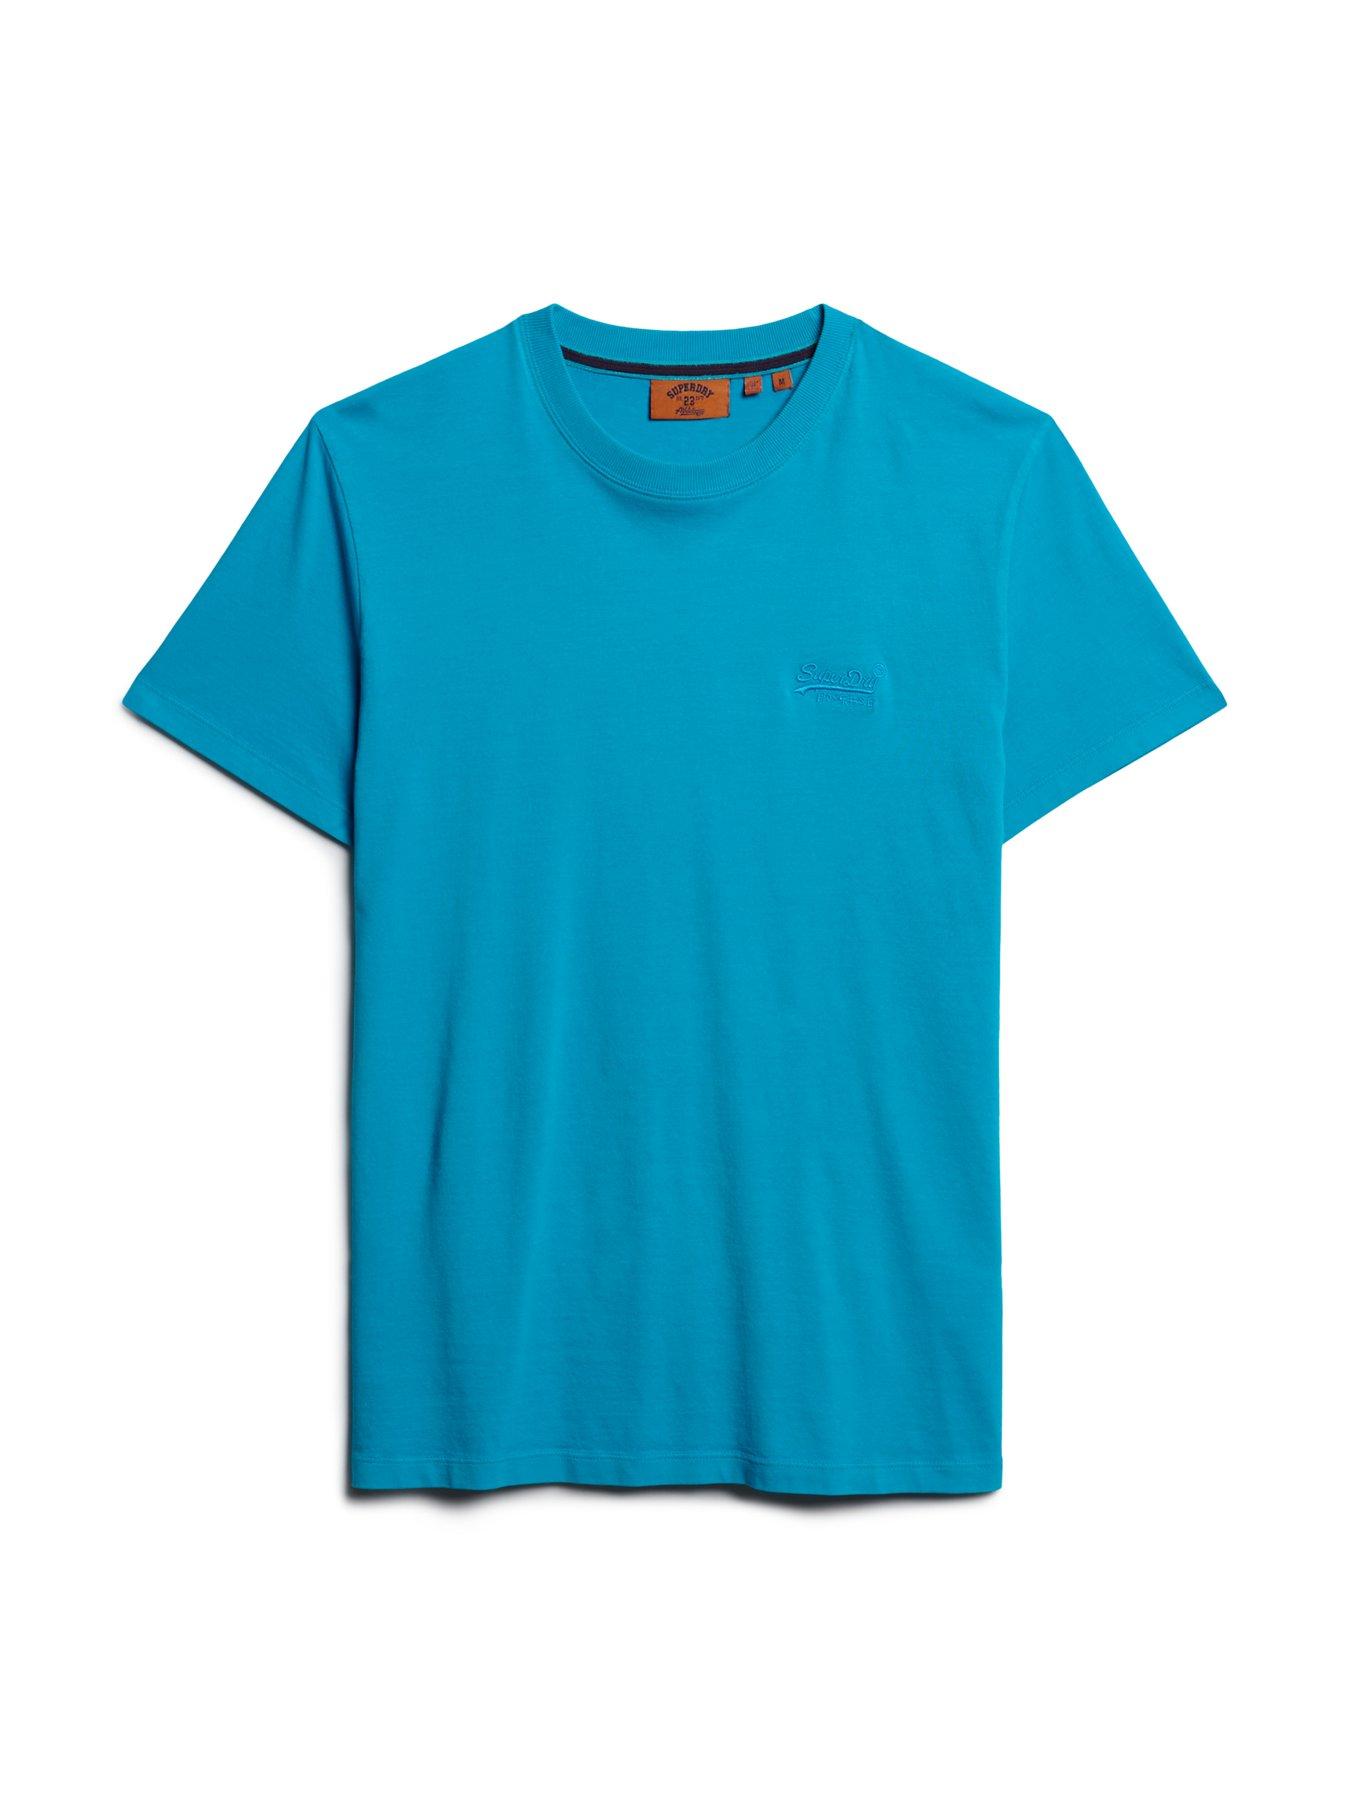 Superdry Essential Embroidered Logo Neon T-shirt - Bright Blue | Very.co.uk